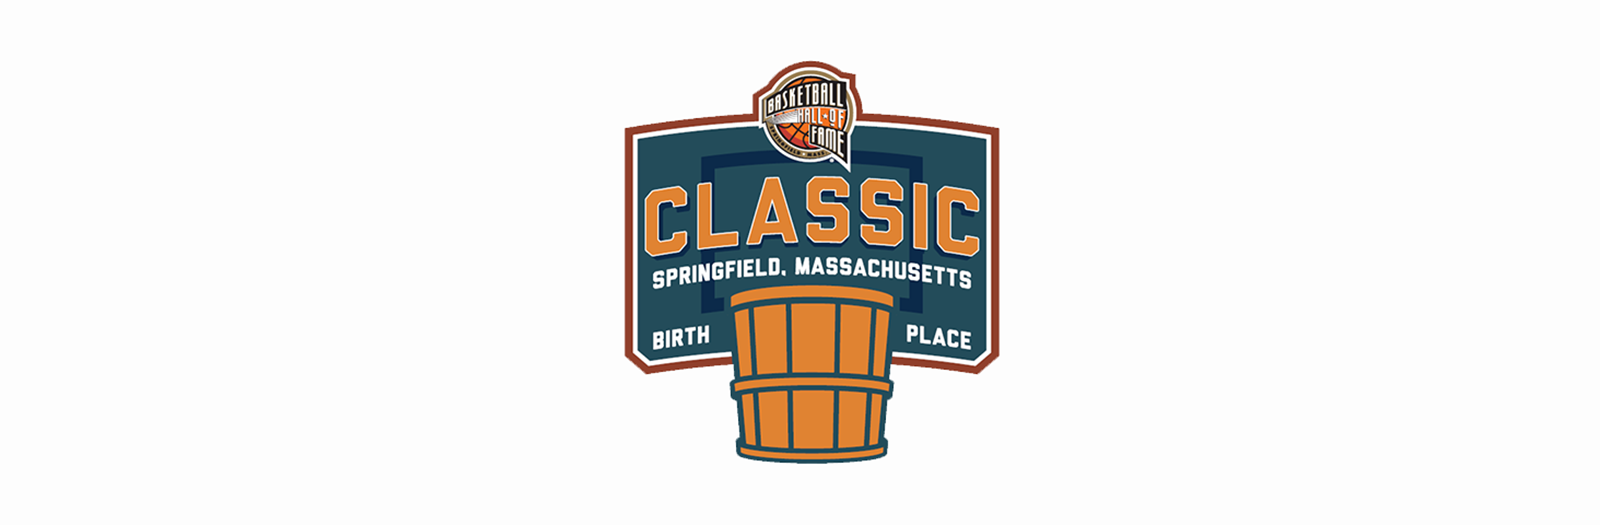 MassMutual Center to Host Basketball Hall of Fame Classic on Saturday, December 17